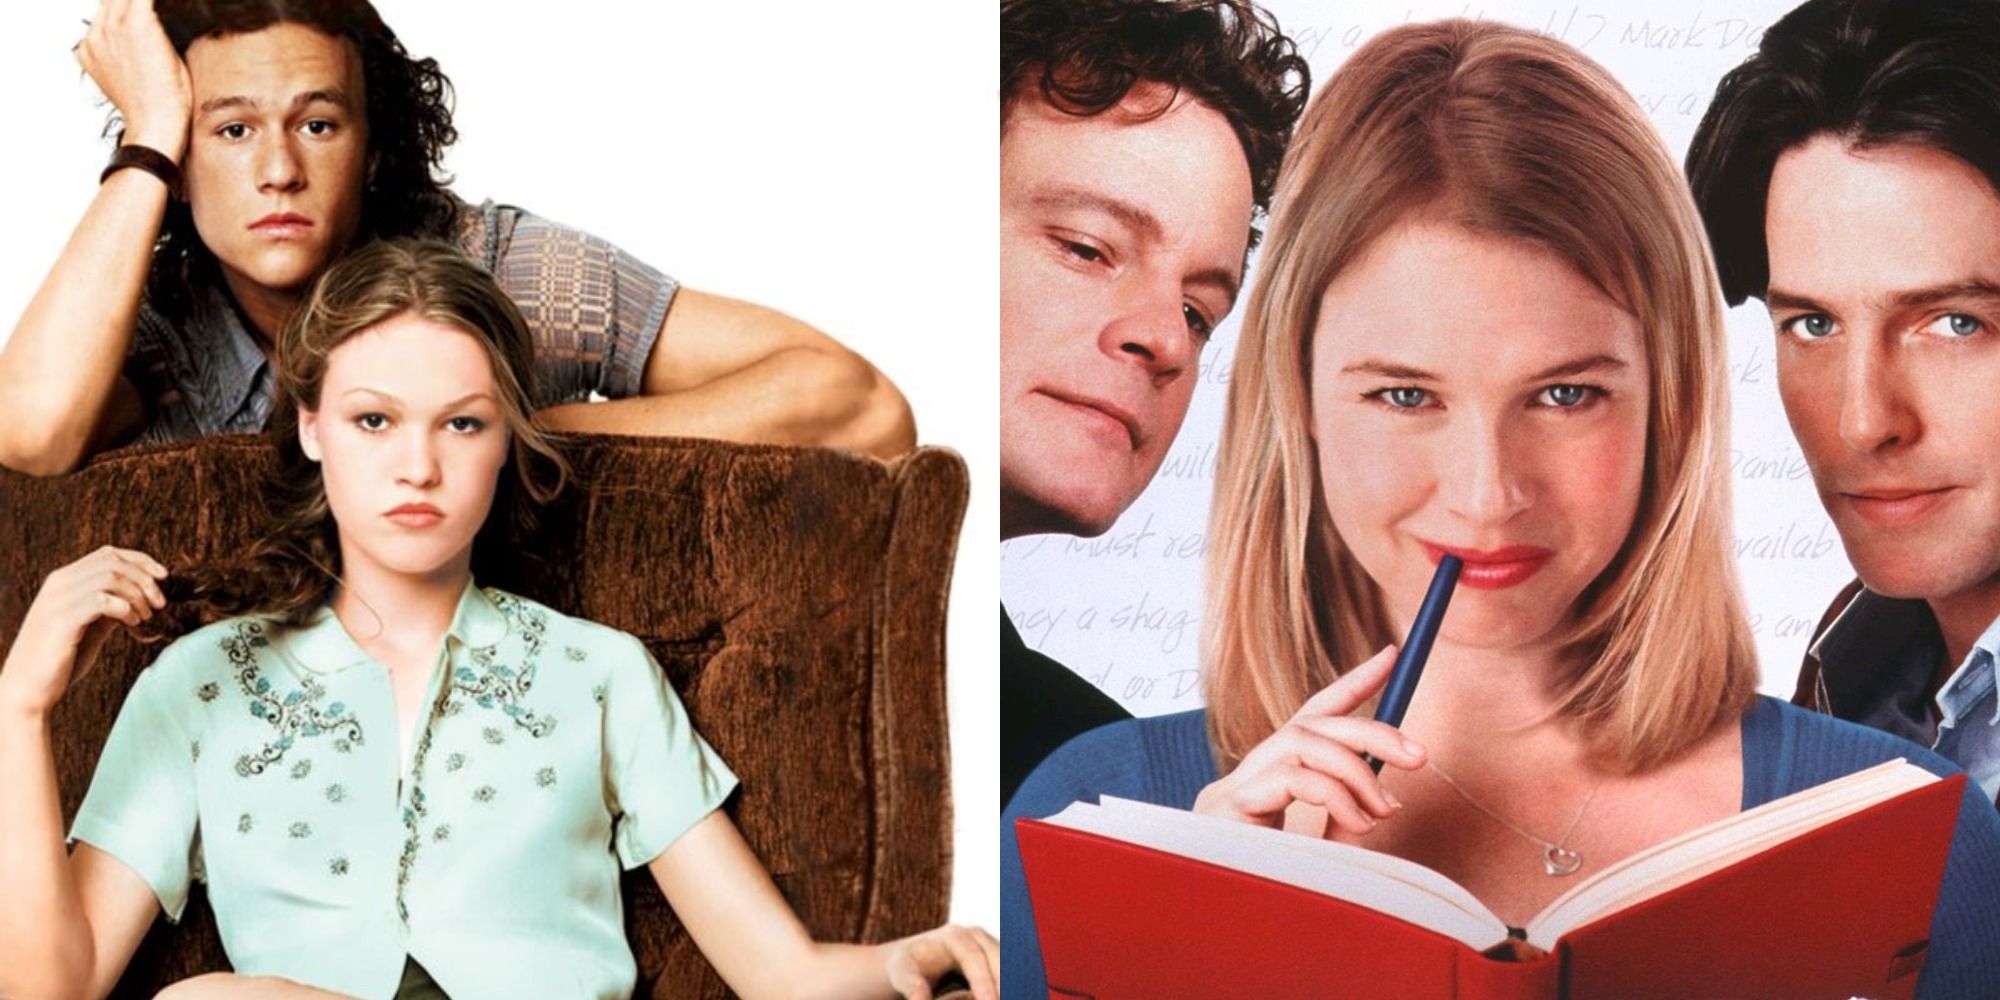 Split image showing Patrick and Kat from 10 Things I Hate About You, and Mark, Bridget, and Daniel from Bridget Jones's Diary